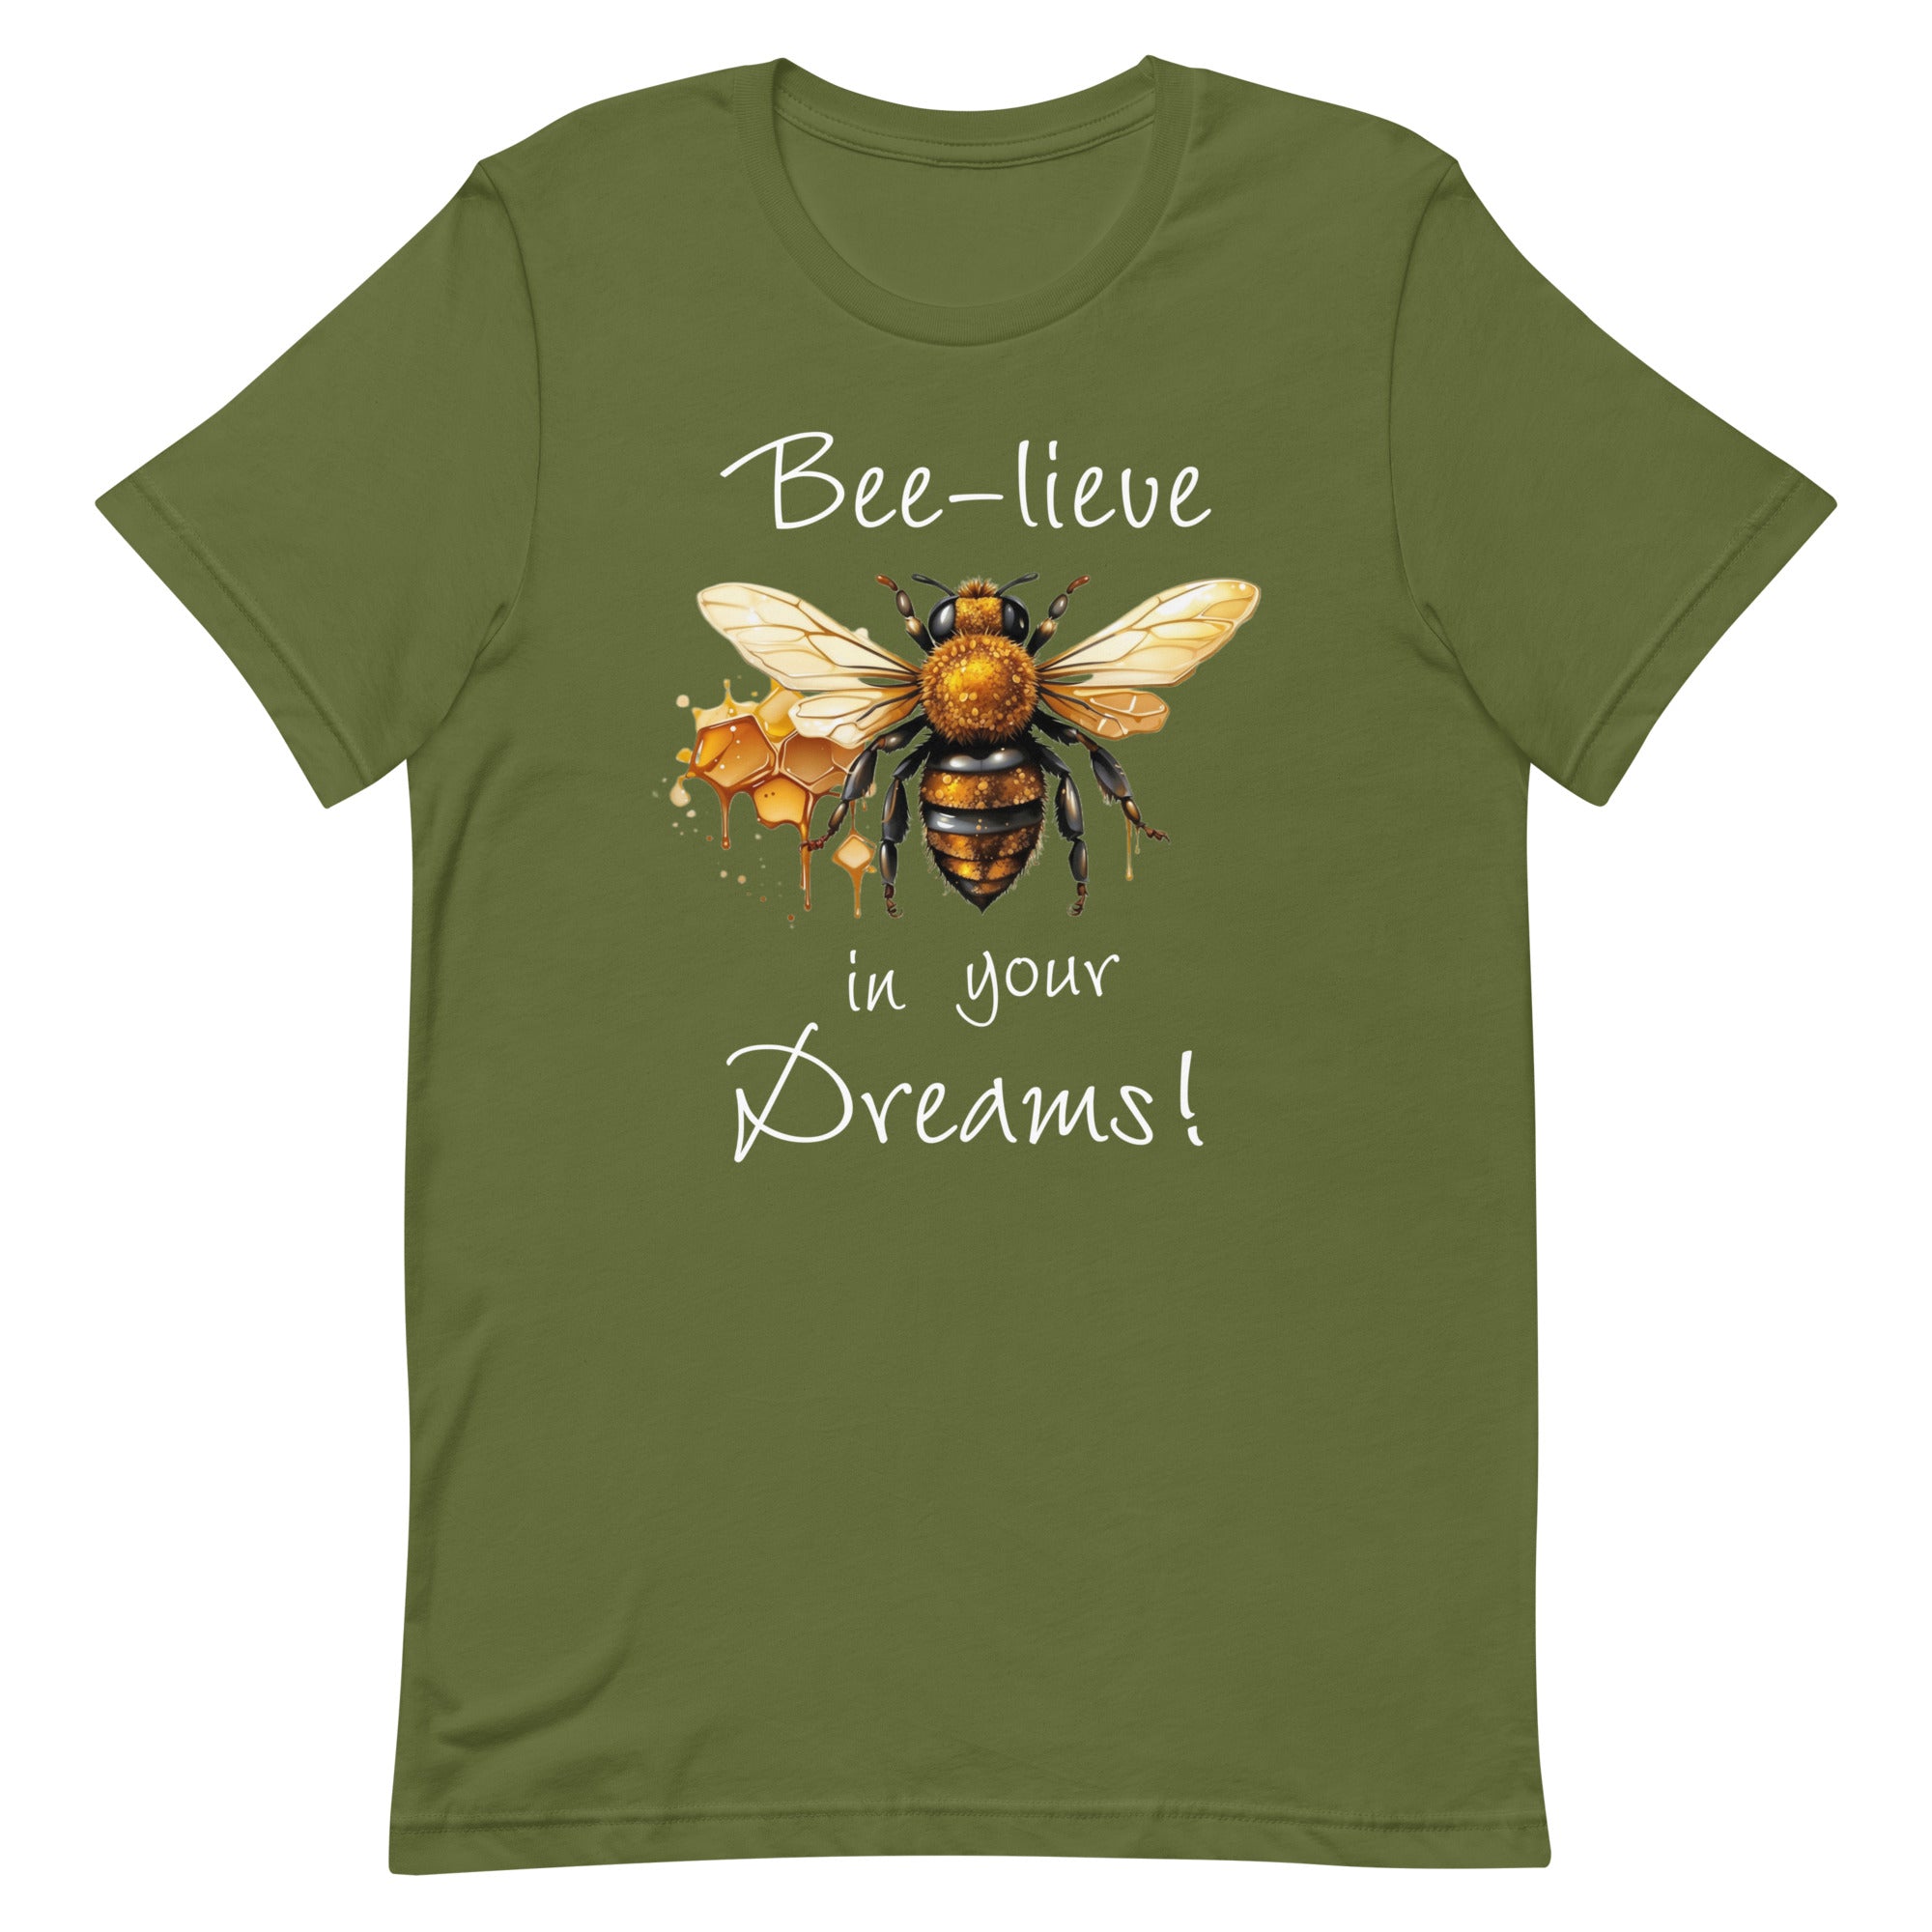 Bee-lieve in Your Dreams T-Shirt, Gift for Bee Lovers Olive S XL L M DenBox